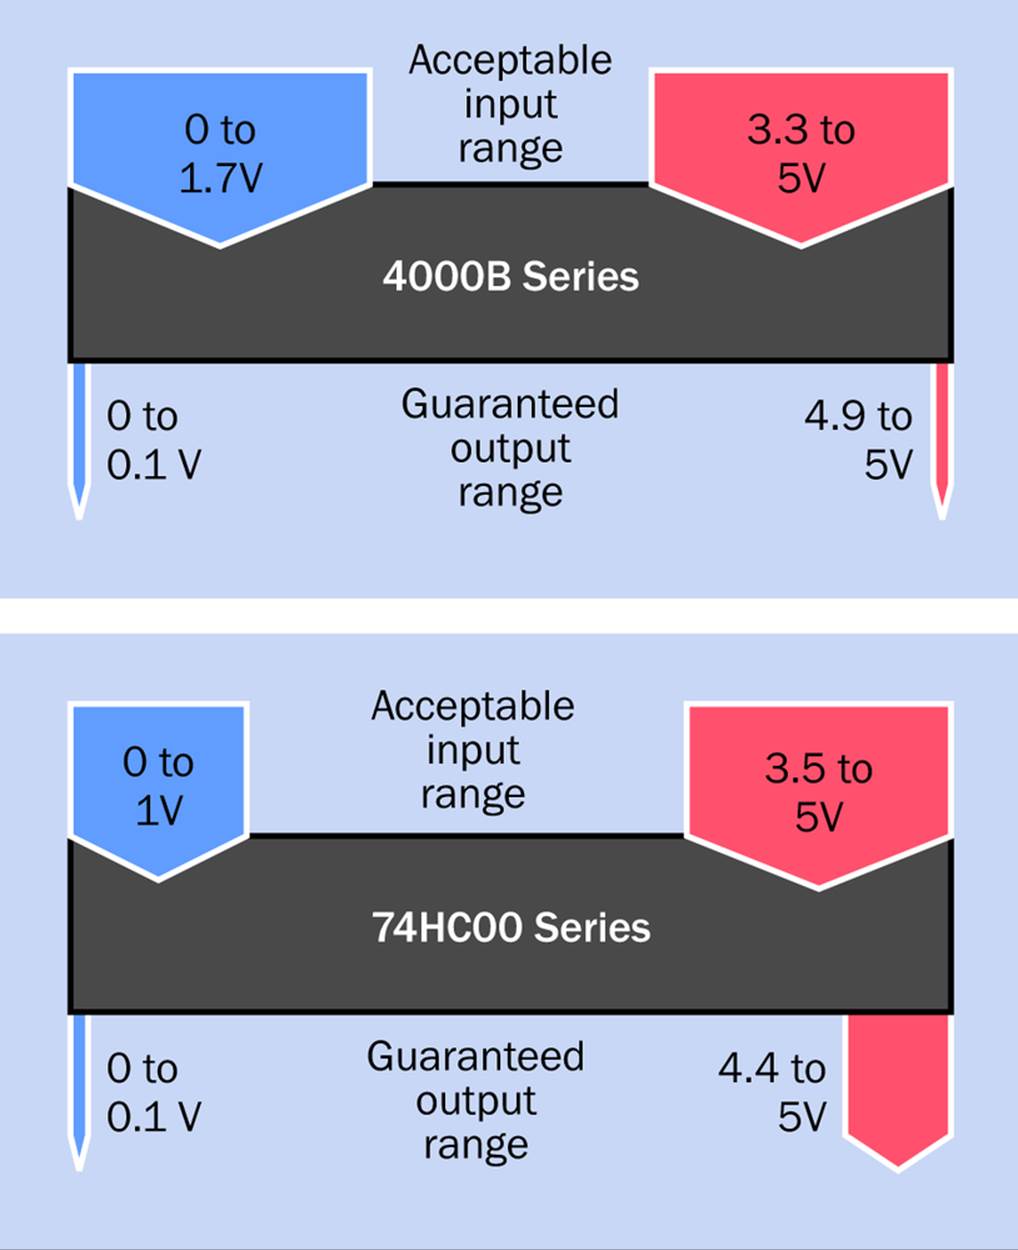 Acceptable input voltages and guaranteed output source-or-sink voltages for logic chips in the 4000B and 74HC00 families. The output voltages are specified assuming an output current of 4mA (for 74HC00 chips) and 0.5mA (for 4000B chips). Higher current values will pull down the voltages.